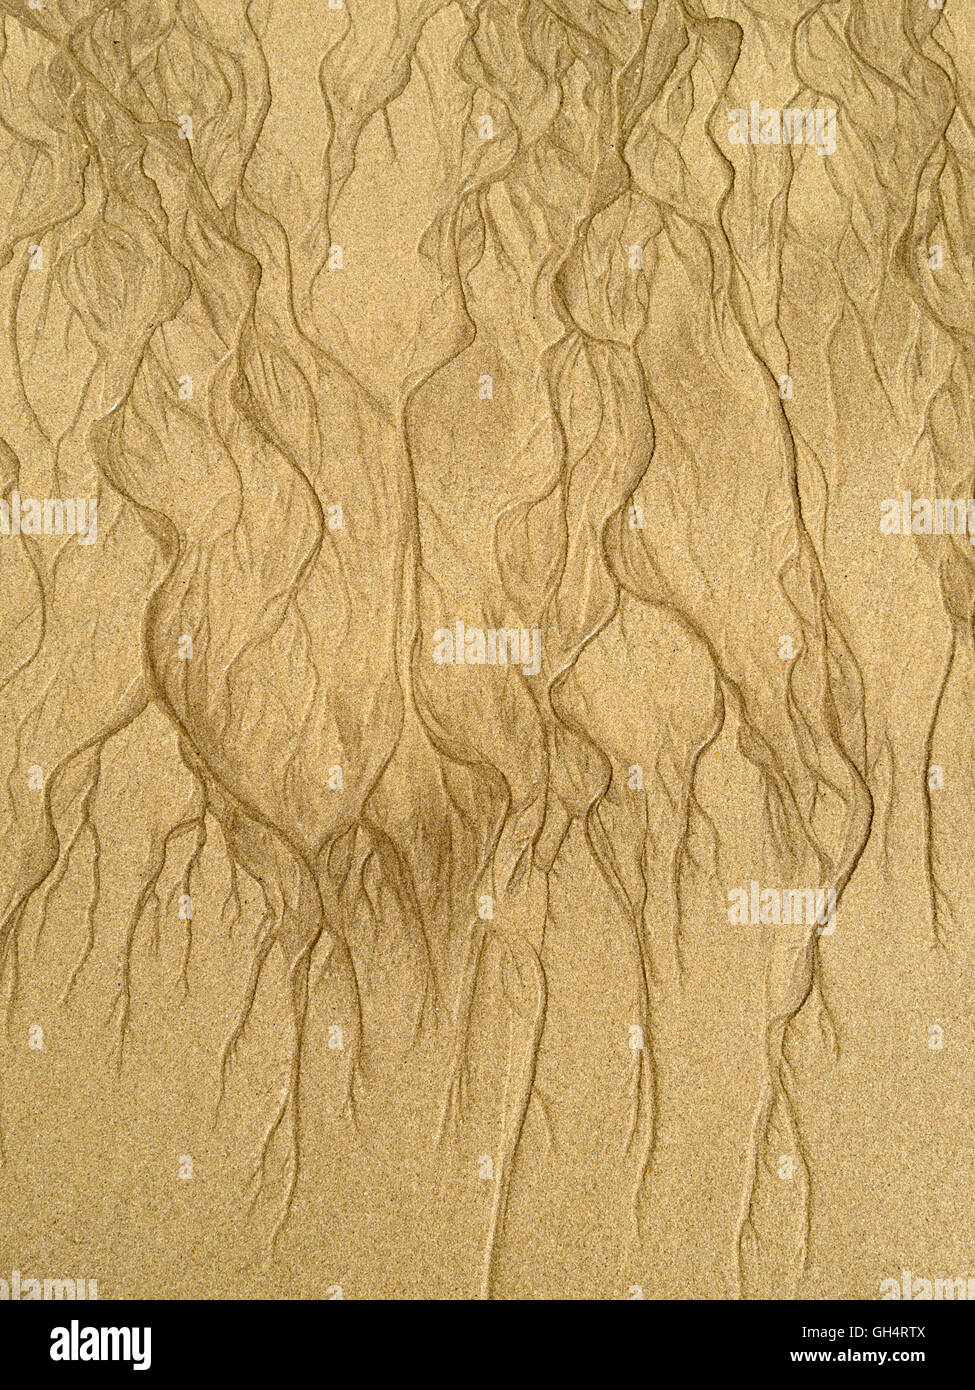 Patterns in yellow beach sand caused by flowing water Stock Photo